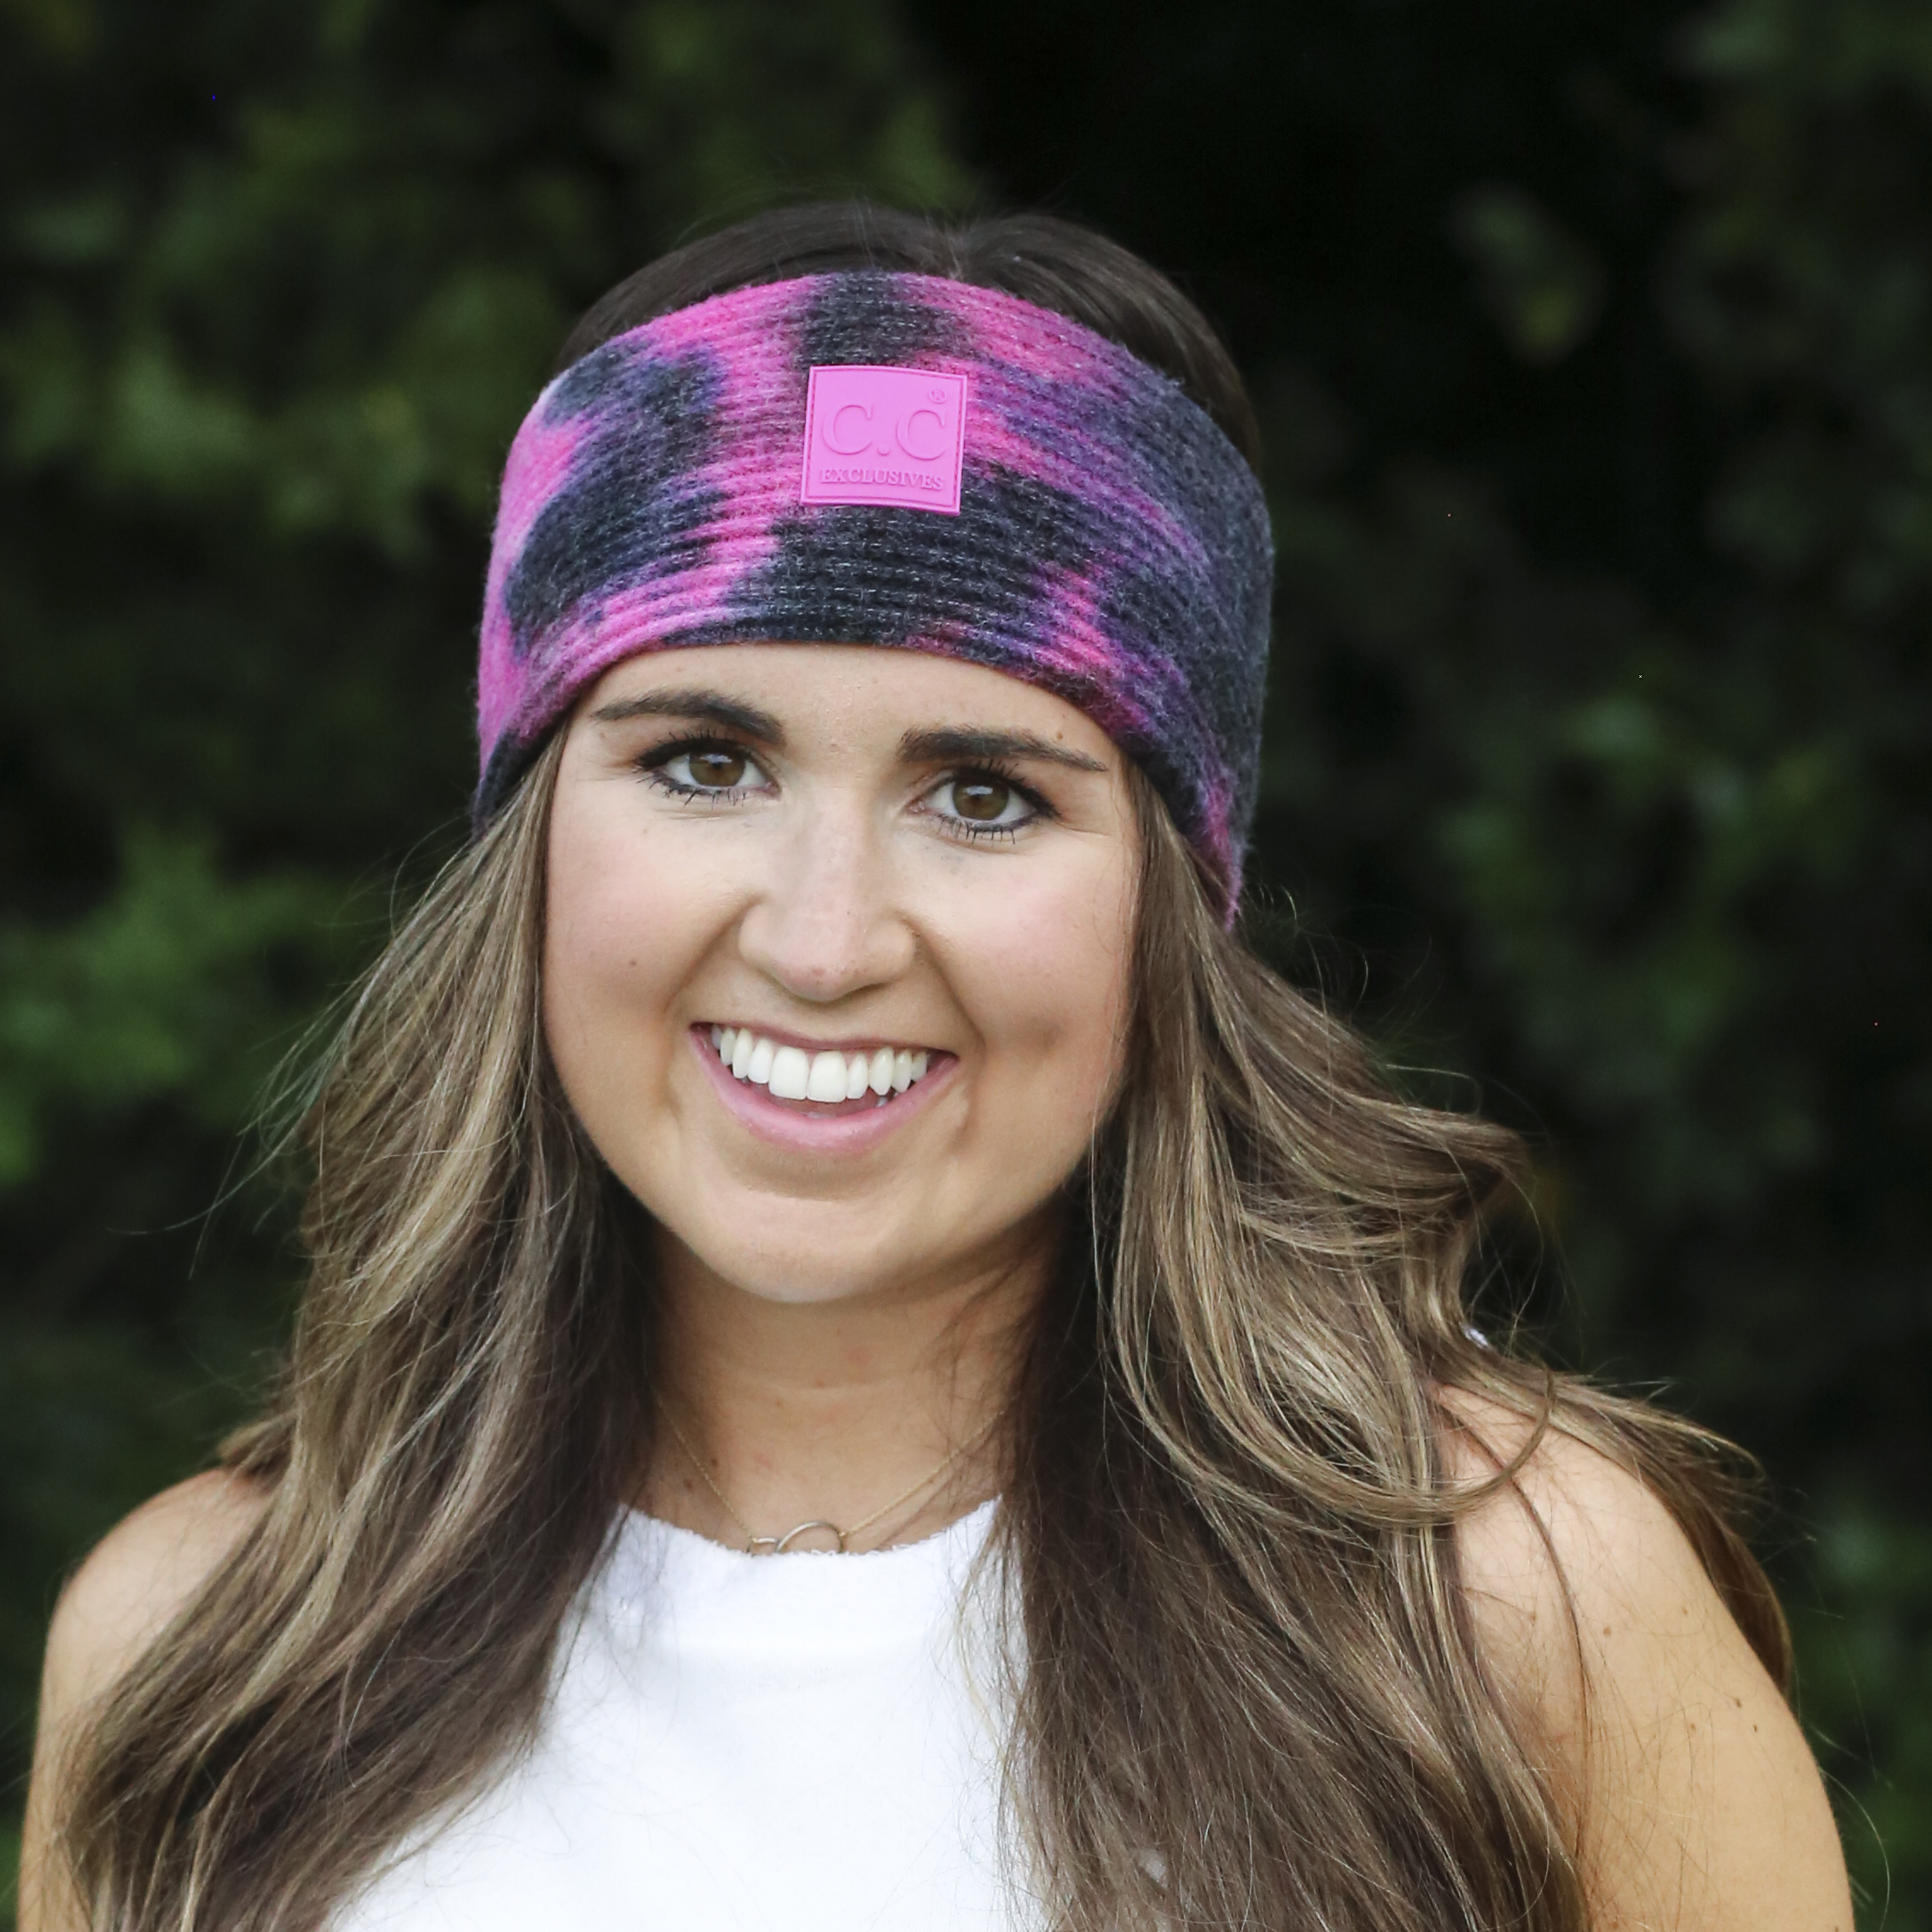 HW-7380 Tie Dye Headwrap with C.C Rubber Patch - Black/Hot Pink